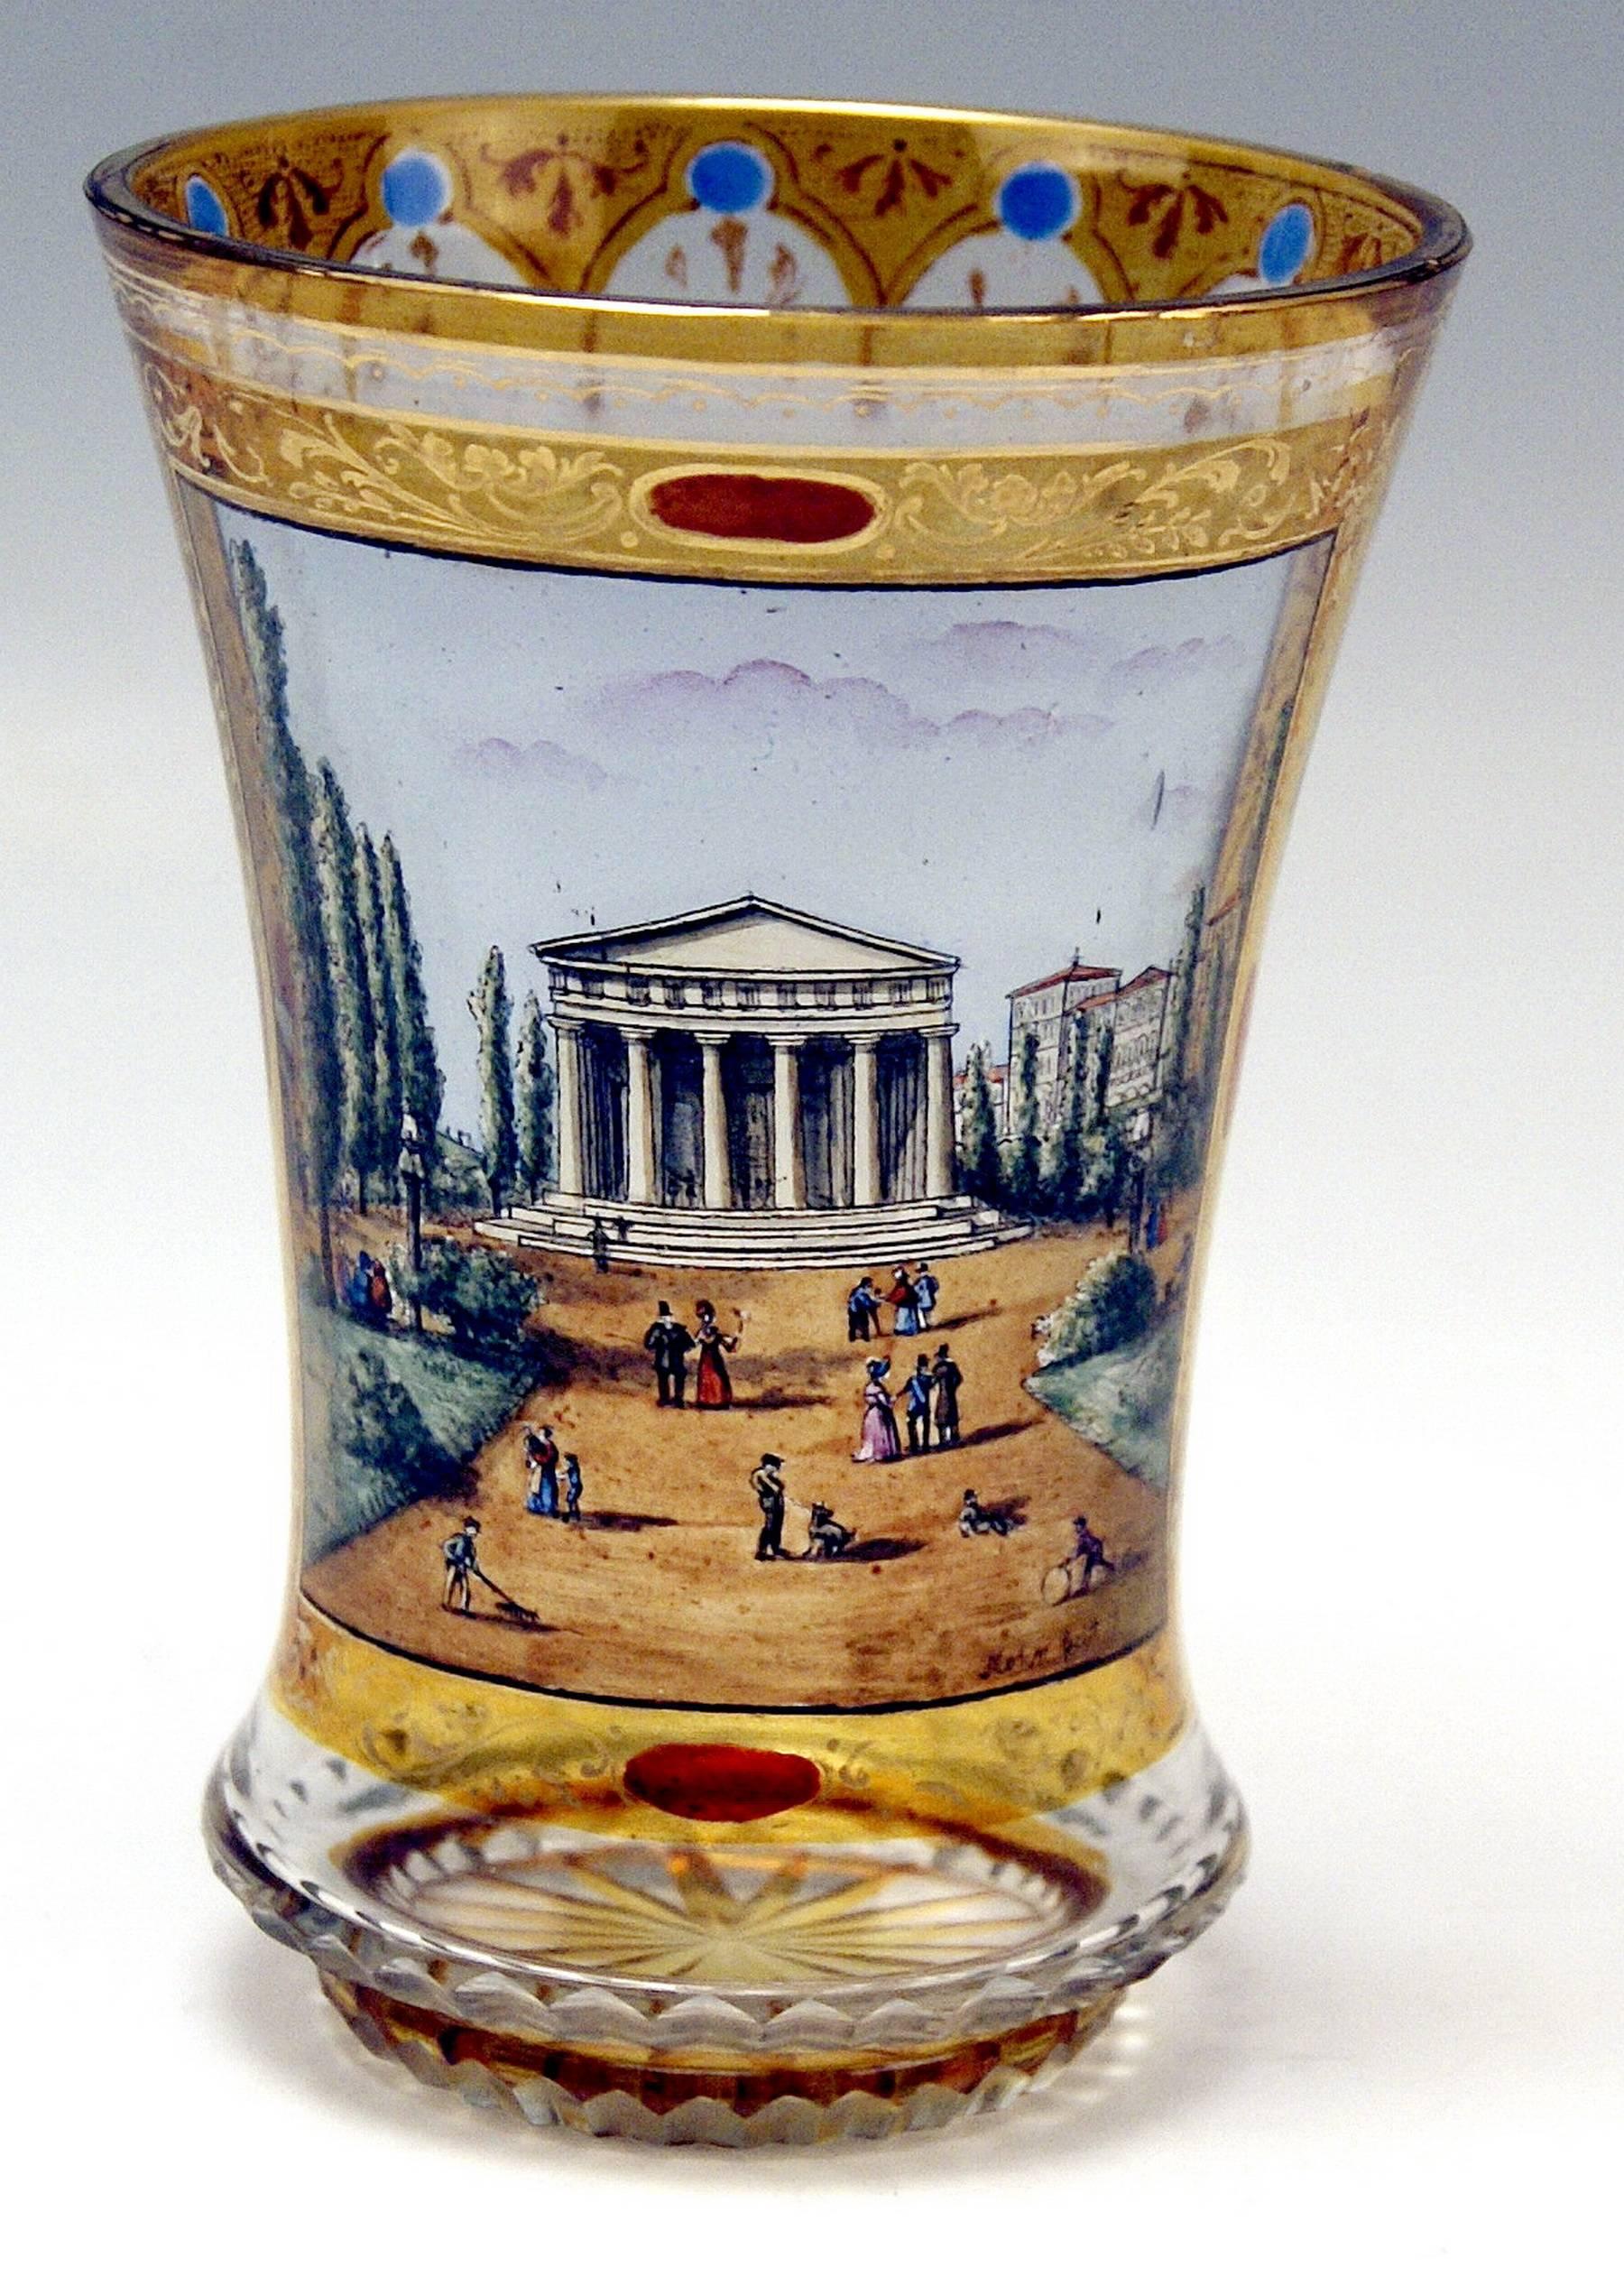 Fine glass beaker/colorless cut-glass of Biedermeier period, with painted view of theseus temple in Vienna: Picture created by follower of Gottlob Samuel Mohn (1789-1825)   /  made circa 1830-1840.

Specifications: 
Stunningly manufactured